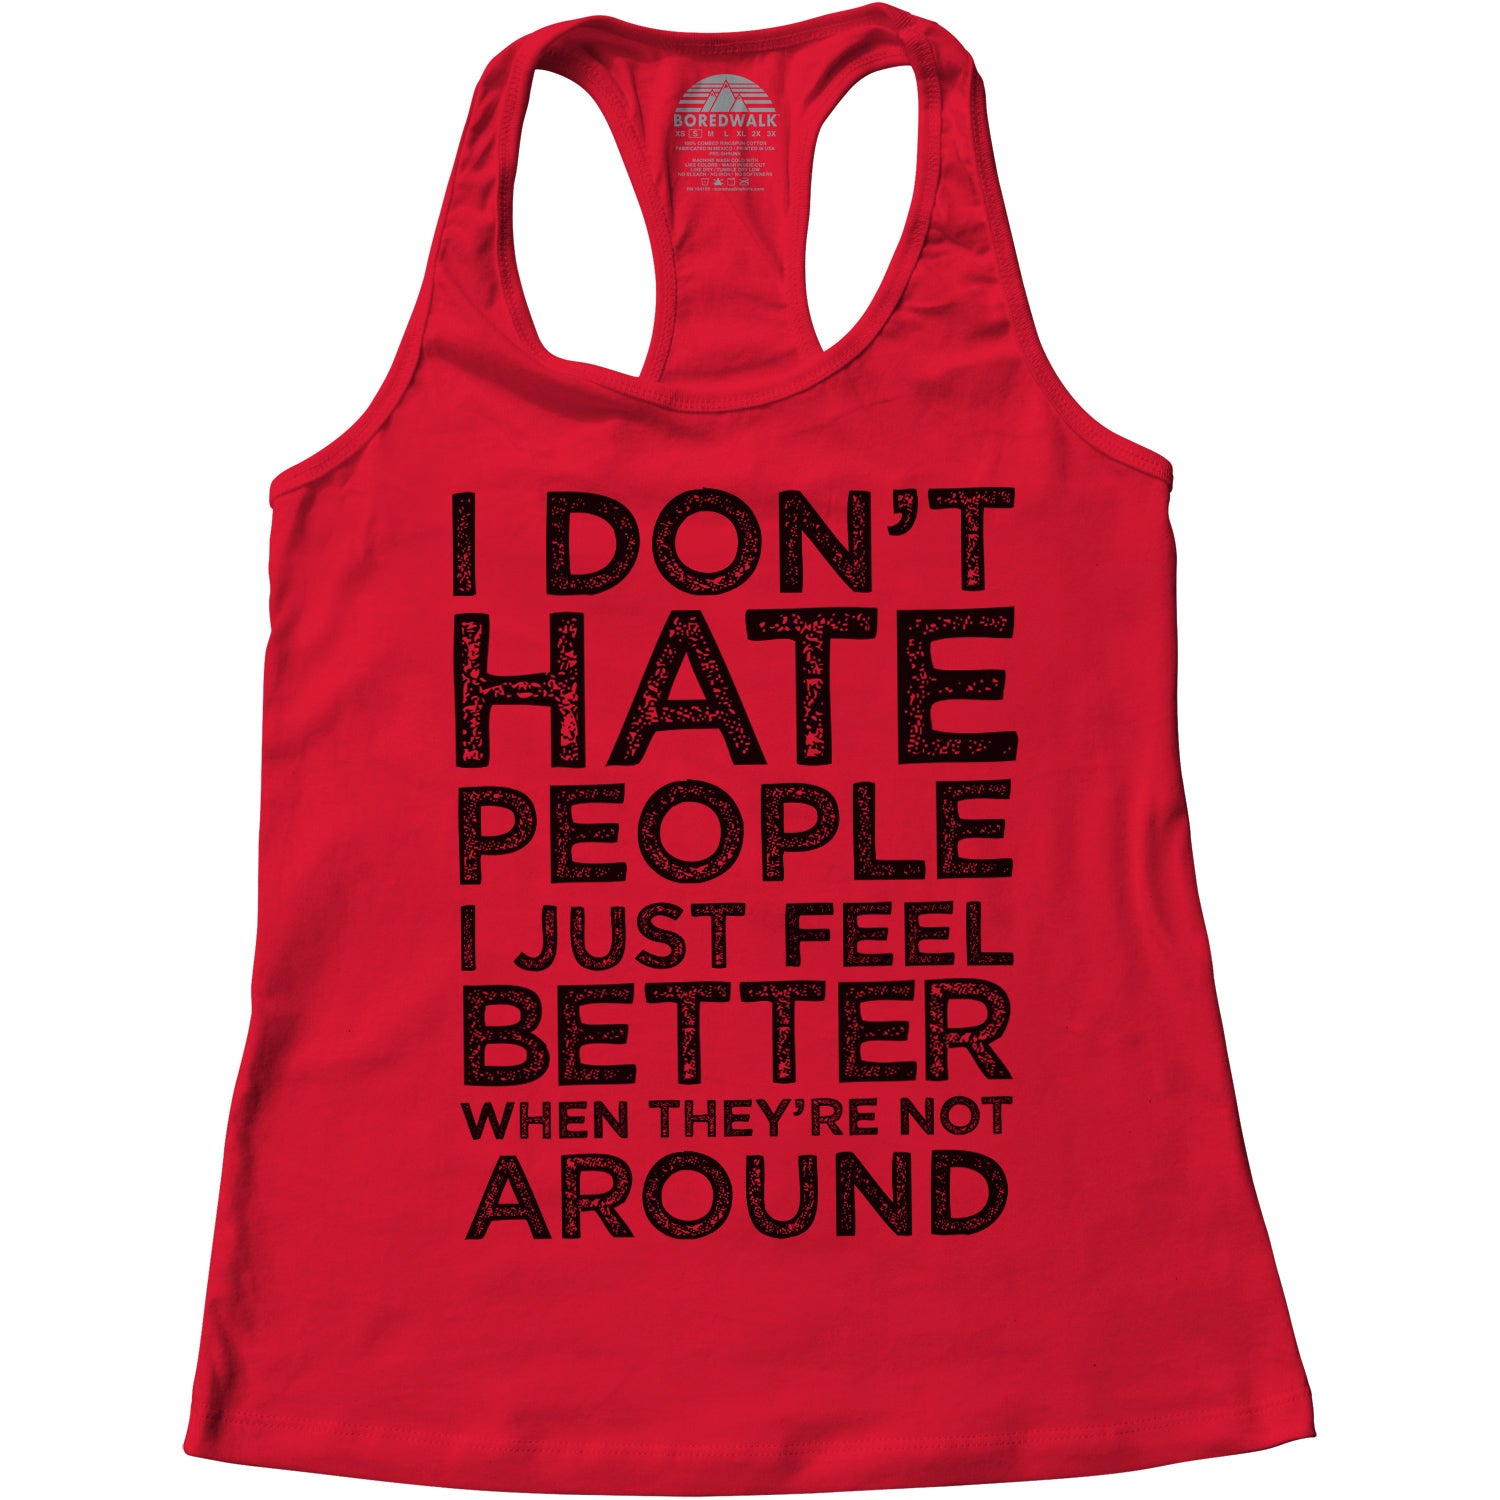 Women's I Don't Hate People I Just Feel Better When They're Not Around Racerback Tank Top